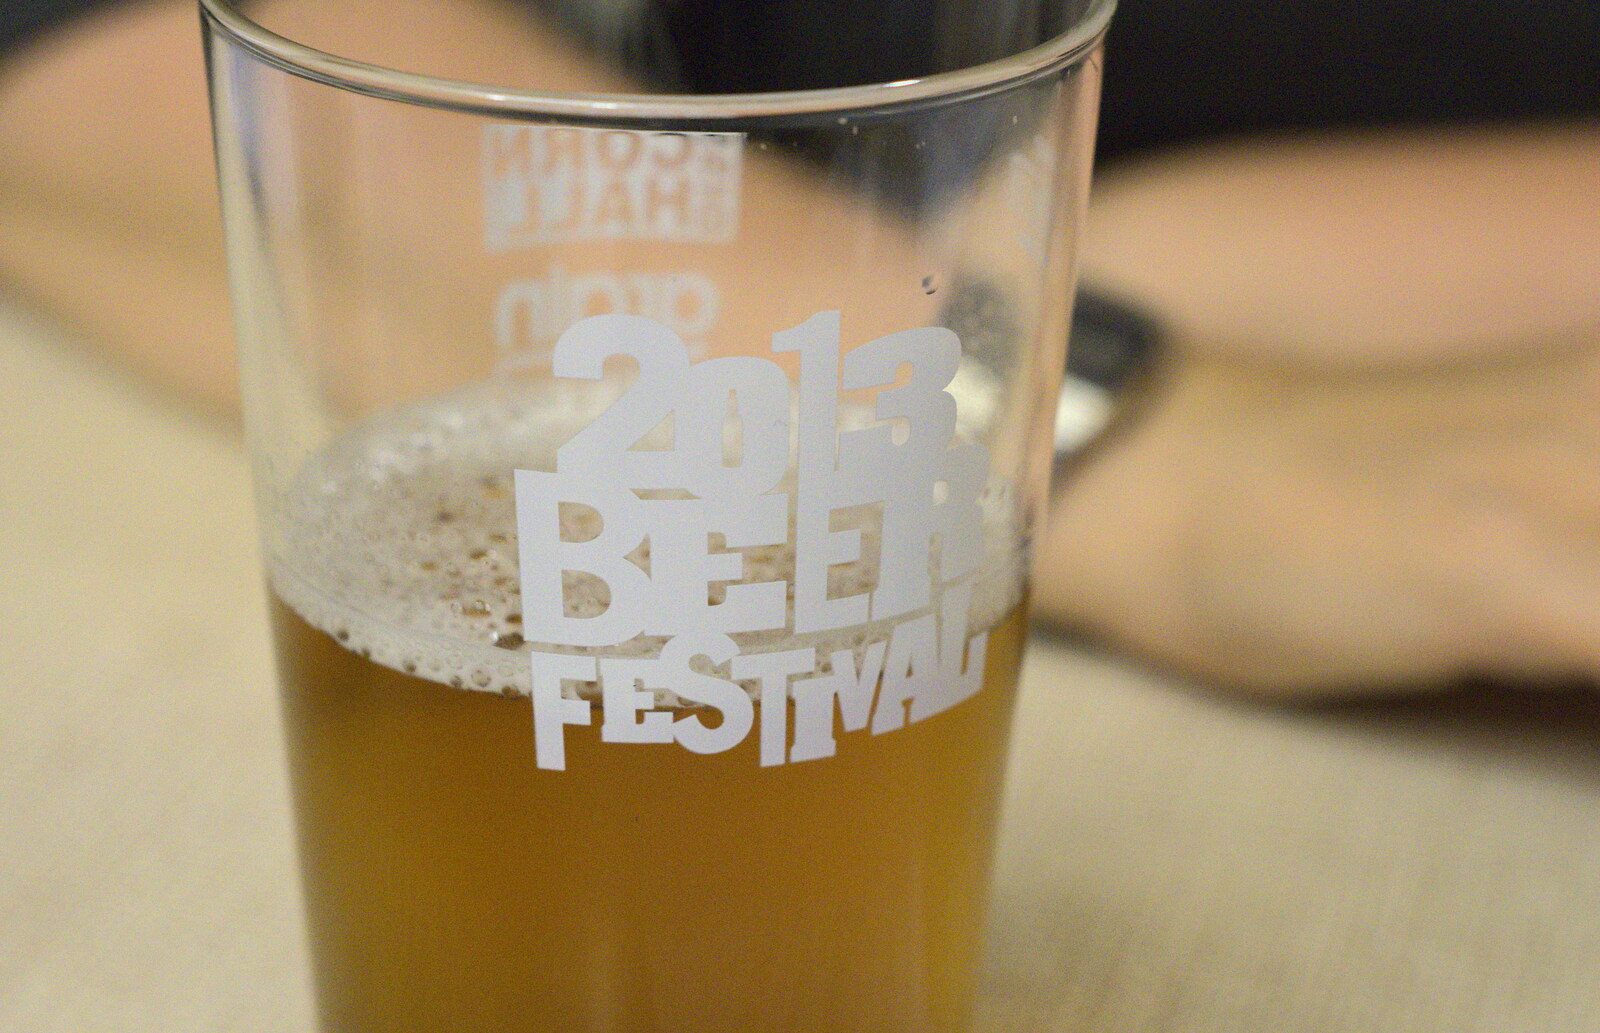 A beer-festival glass from The Diss Cornhall Beer Festival and Maglia Rosa Group, Diss, Norfolk - 12th October 2013